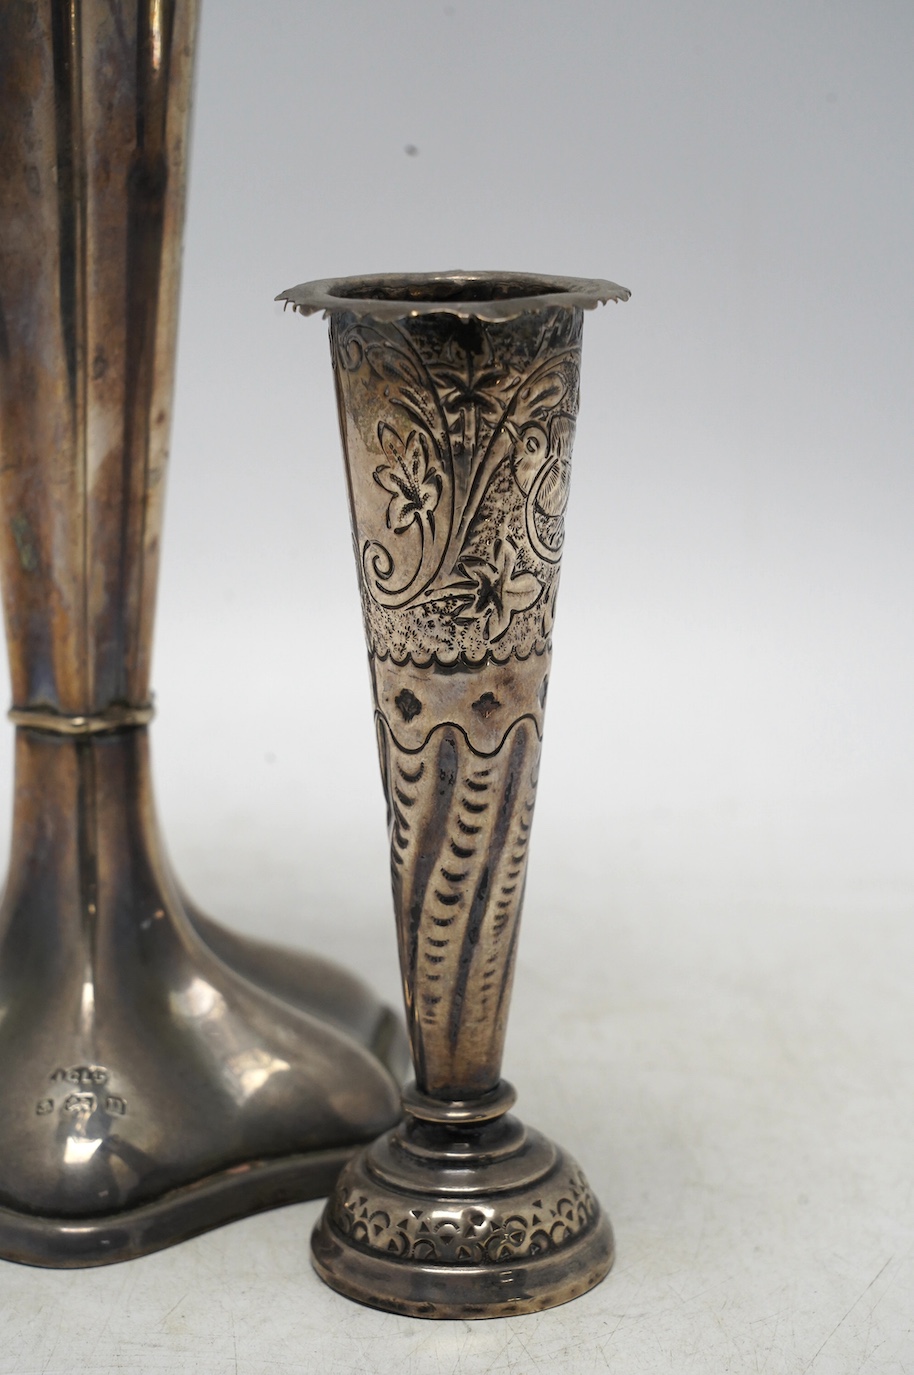 A George V pierced silver trumpet vase, Joseph Gloster Ltd, Birmingham, 1912, height 26.4cm, weighted, together with a smaller silver mounted posy vase. Condition - fair